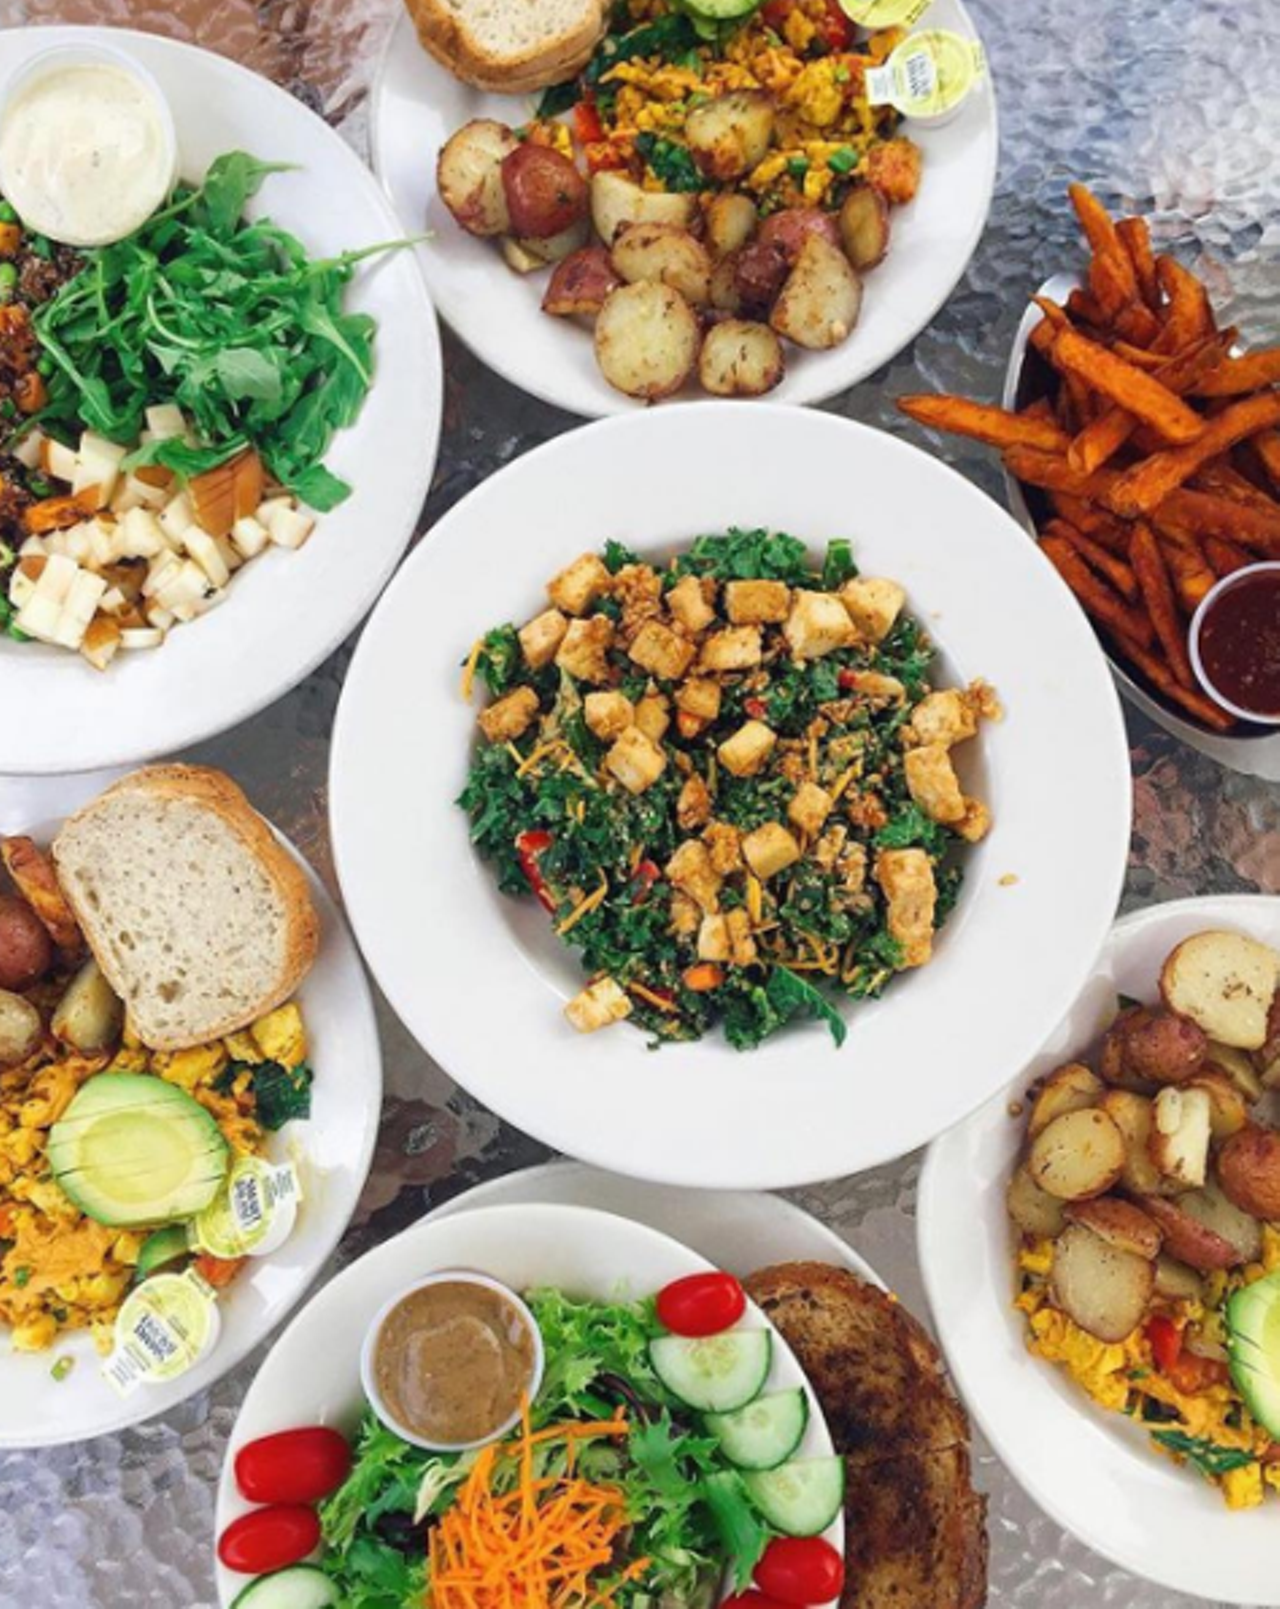 Seva
Not only does Seva have a completely vegetarian menu, but a full bar, a fresh juice bar, and coffee bar, not to mention great service, and a casual, friendly atmosphere.
(313) 974-6661
66 E Forest Ave.
Detroit, MI 48201
Photo via @sevadetroit